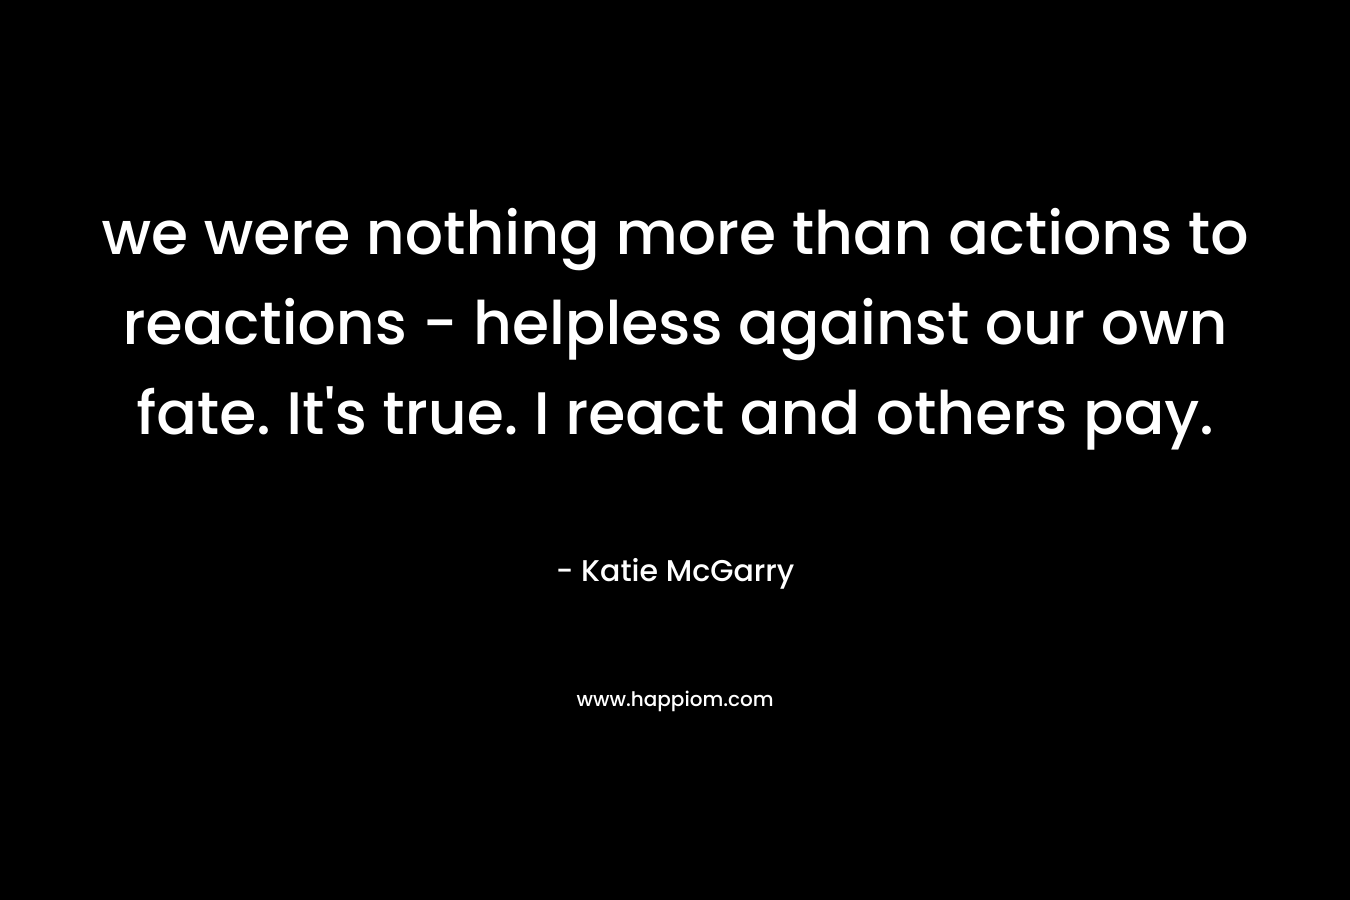 we were nothing more than actions to reactions - helpless against our own fate. It's true. I react and others pay.